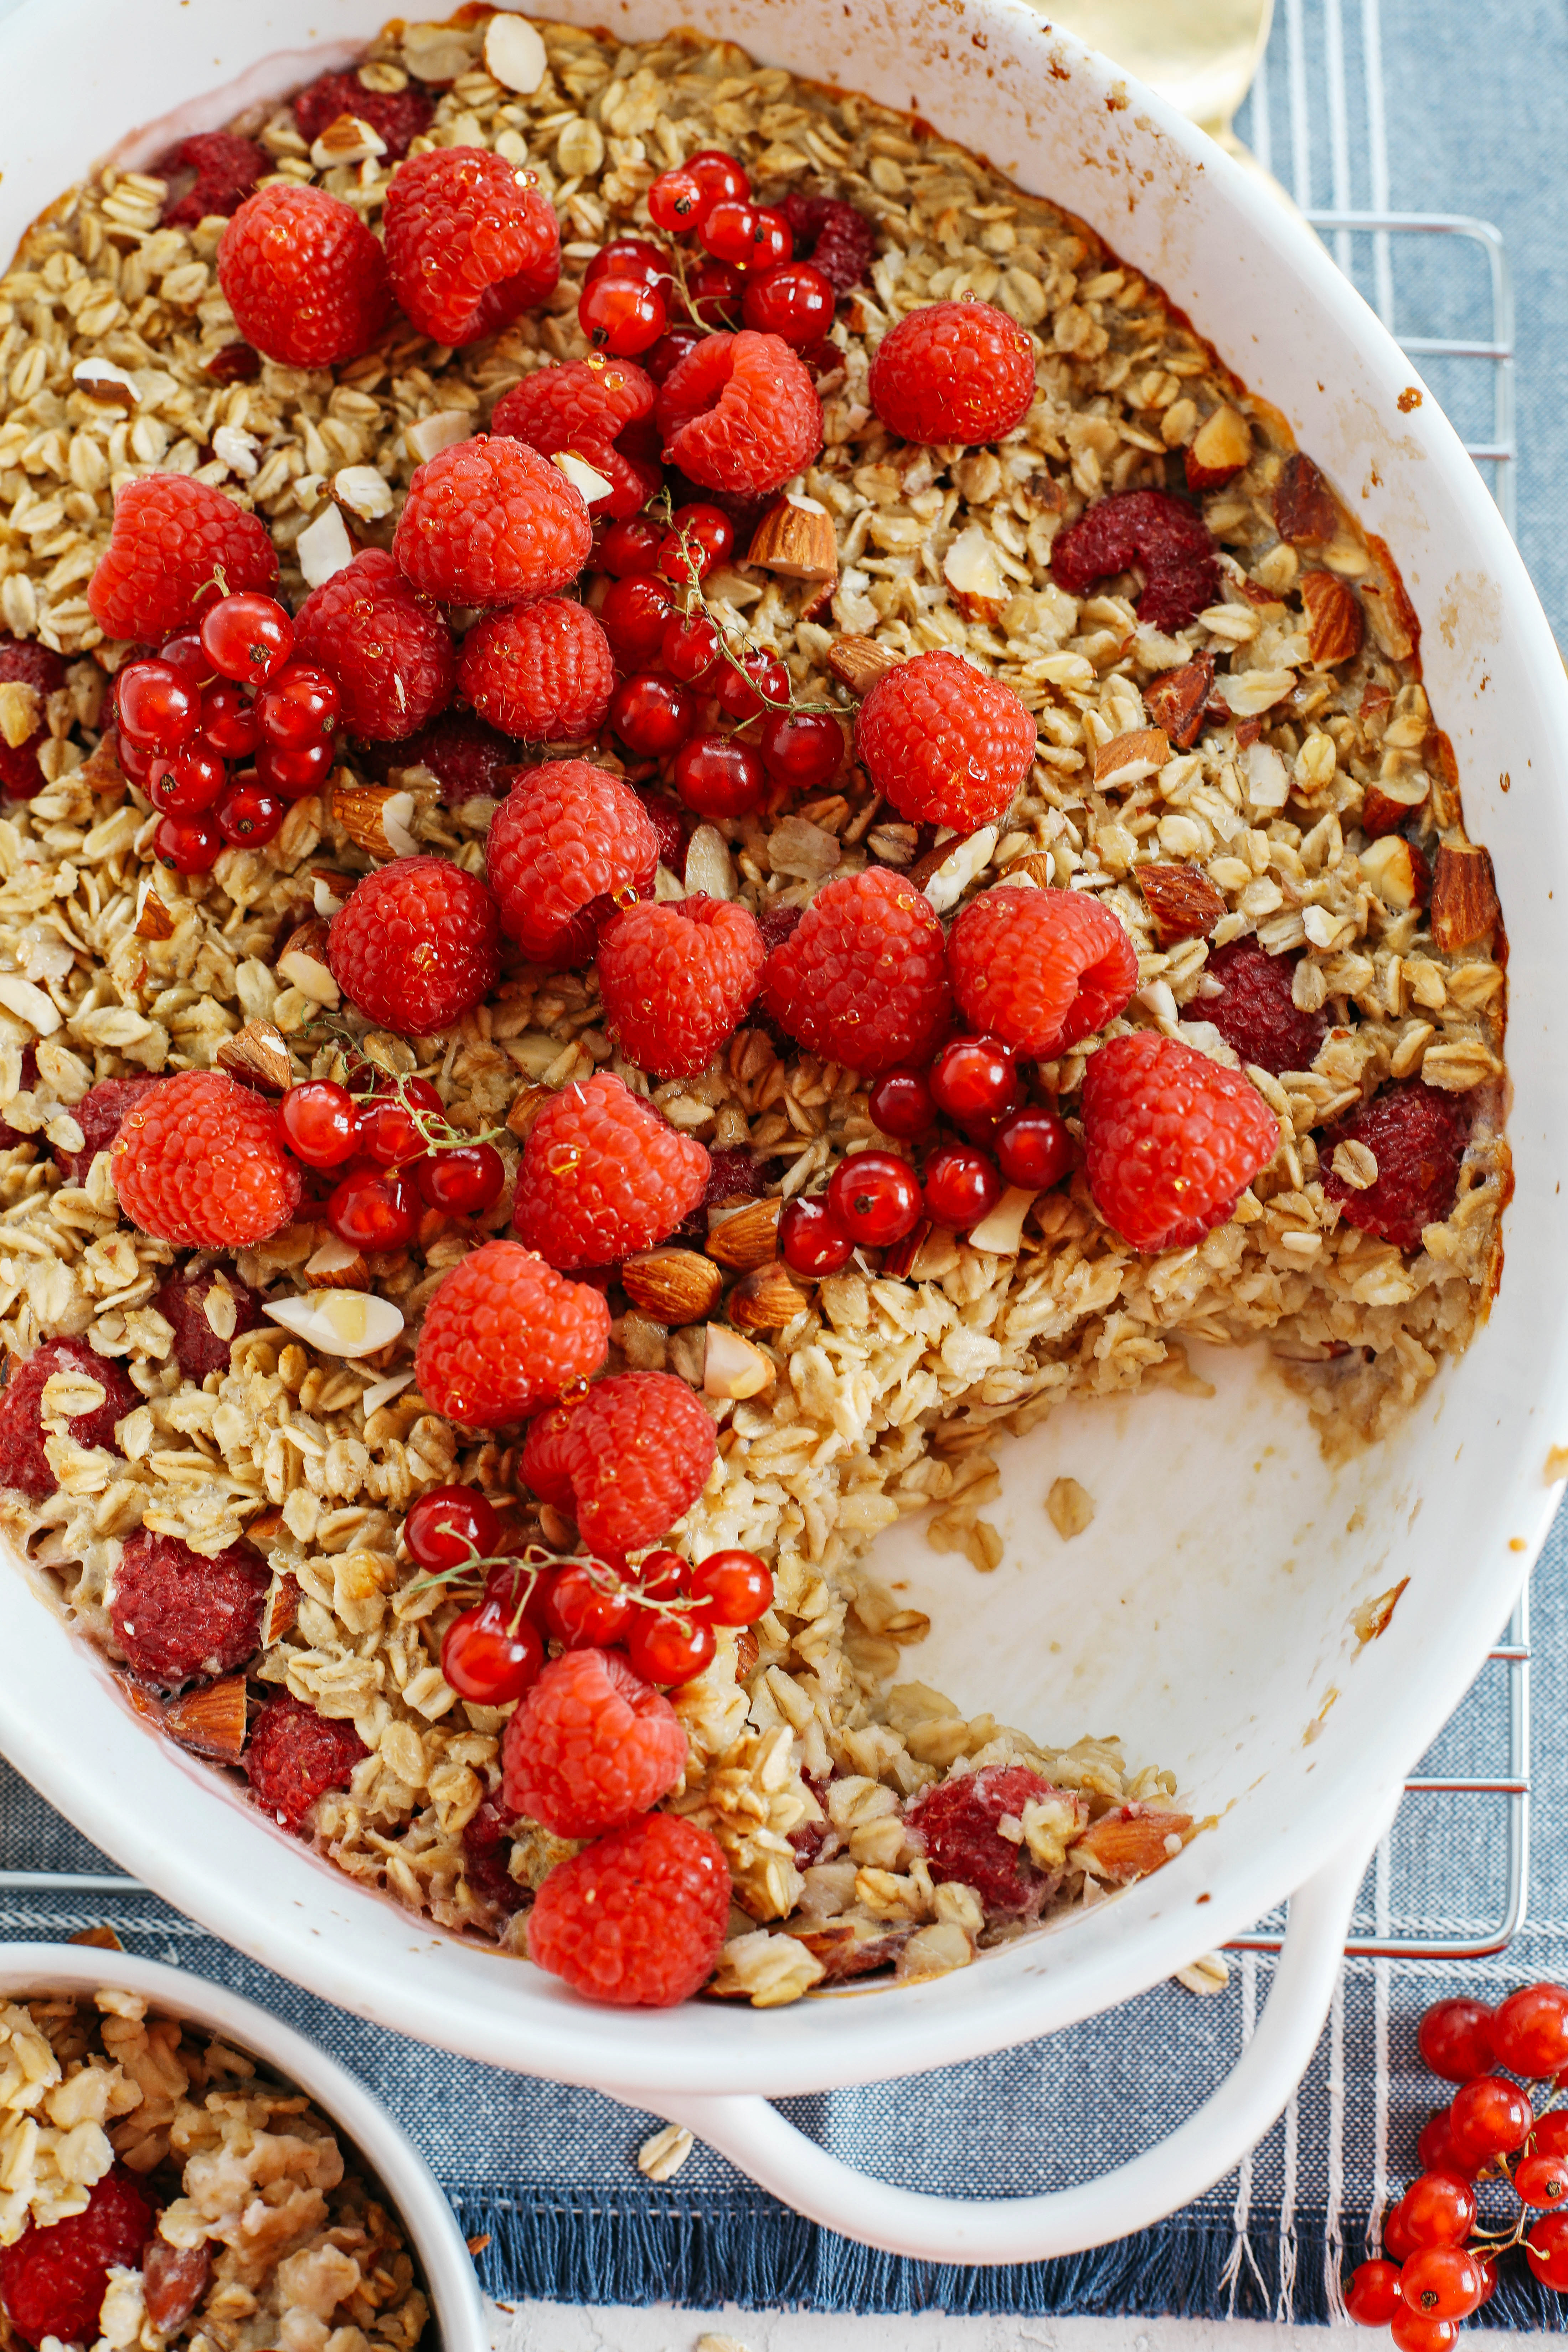 Start your morning off with this delicious Raspberry Almond Baked Oatmeal that is filling, wholesome and naturally sweetened for a perfect healthy breakfast!